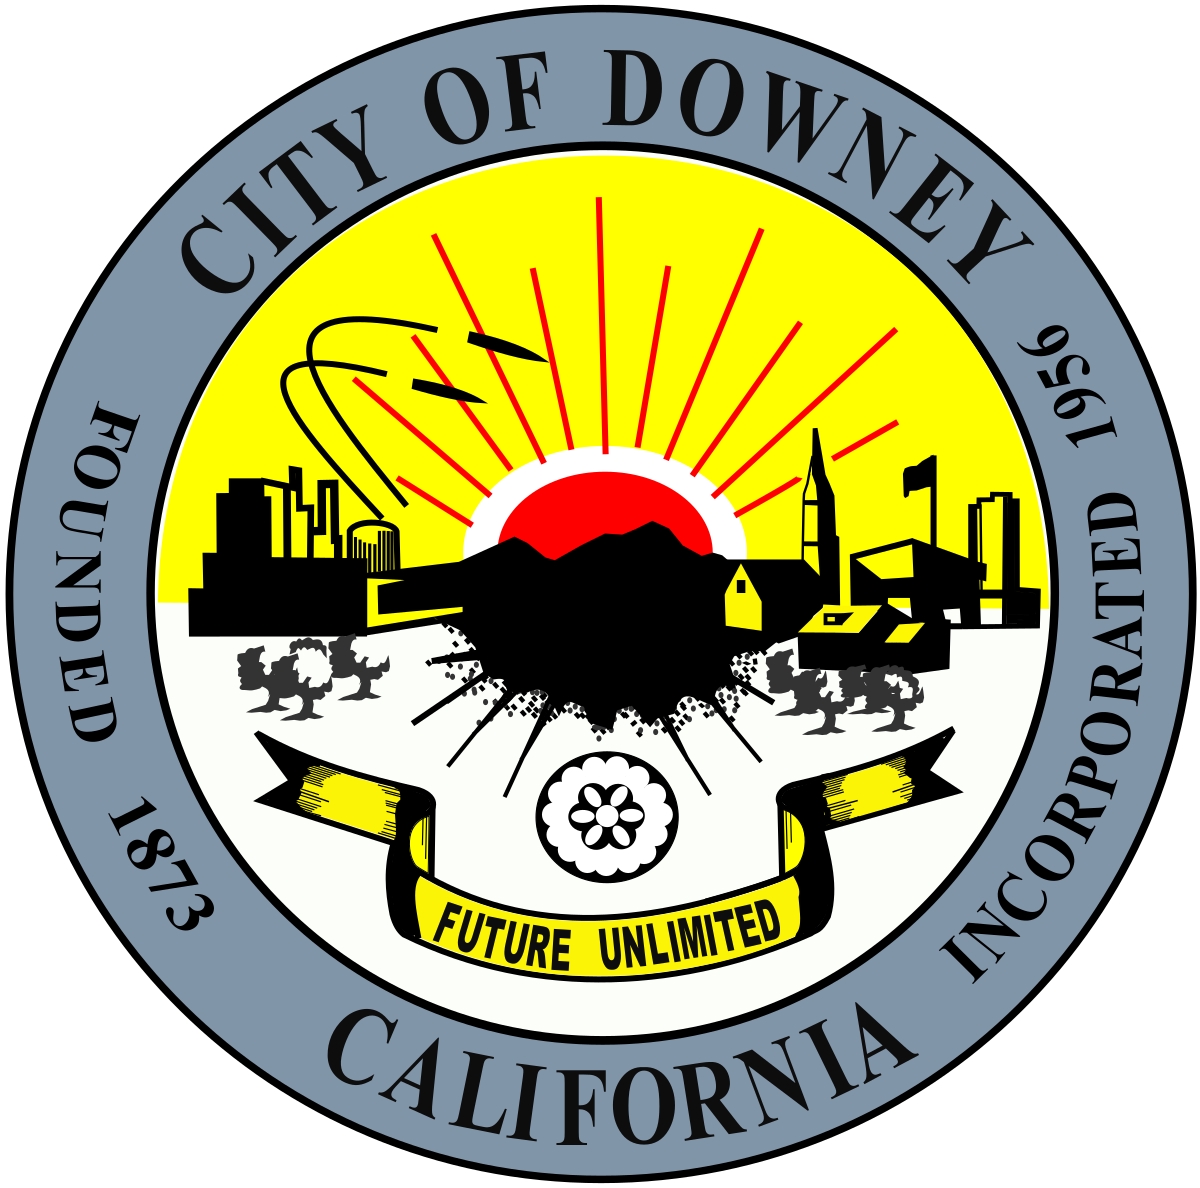 DOWNEY- AC- RED APPLE AIR